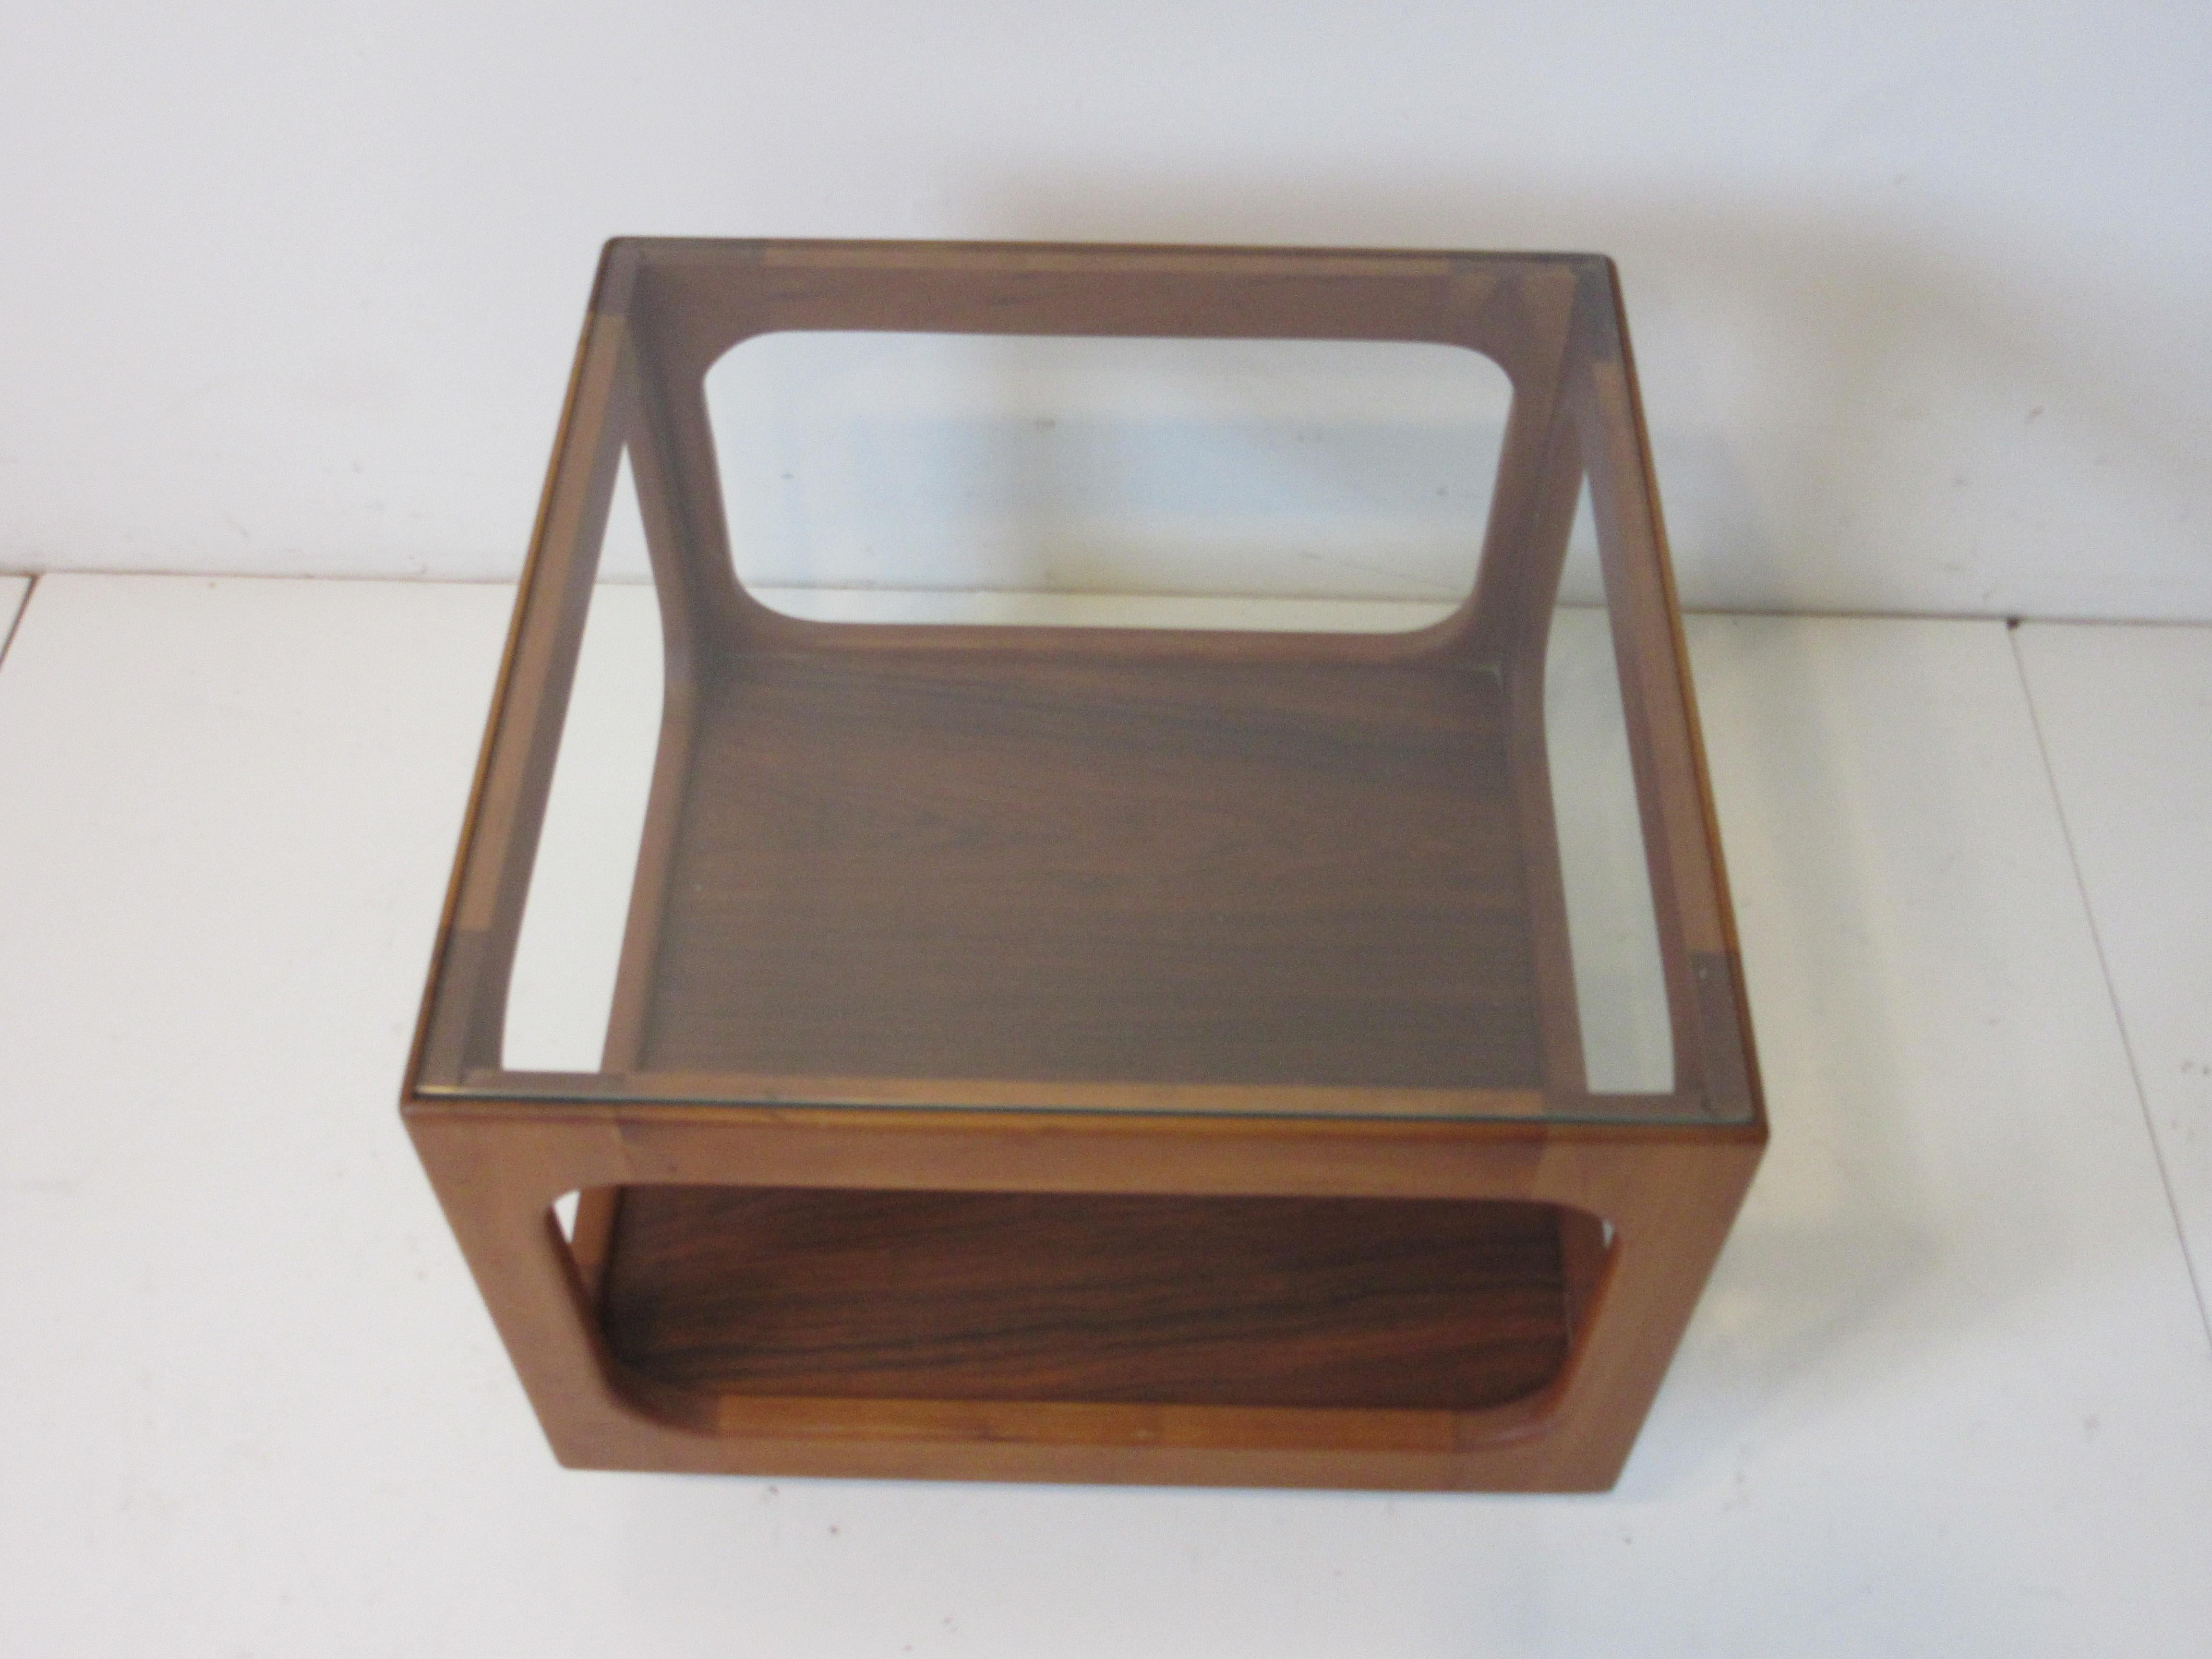 A walnut side table with open cube design having a inset tight fitting glass top in the manner of Otmar Danish styled furniture. The bottom of the cube has a darker walnut shelve base that the cube giving the piece some contrast with the kick